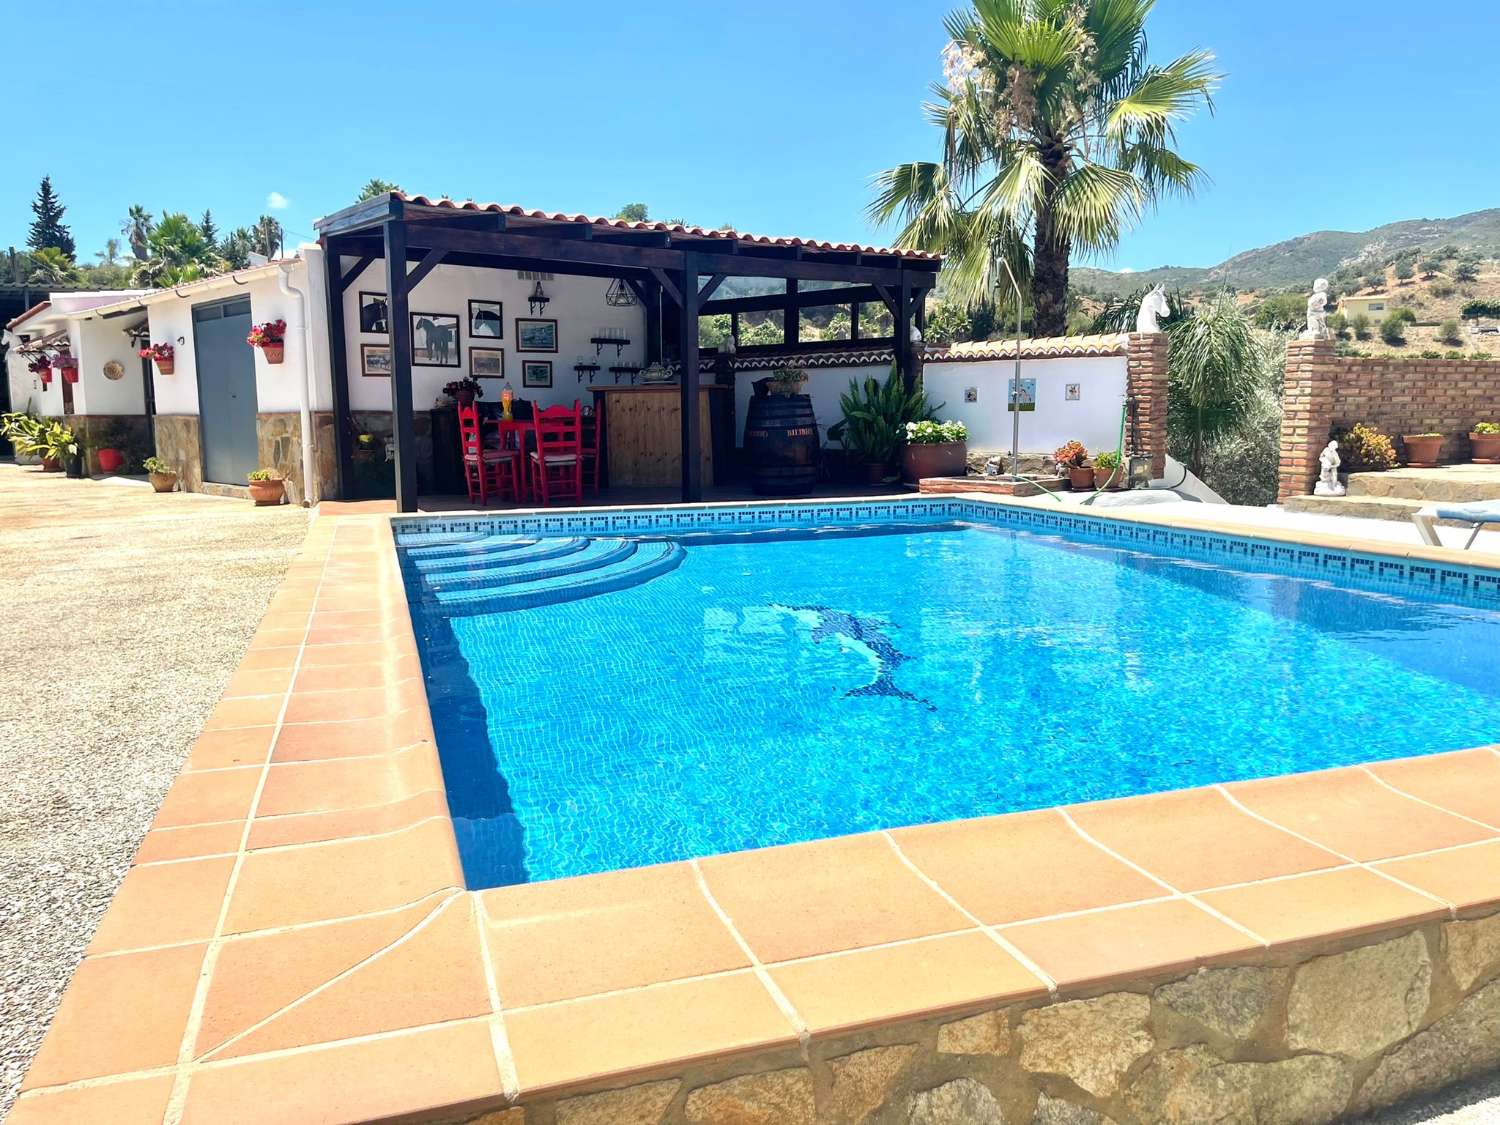 Finca with house and facilities for horses in Alhaurin de la Torre.